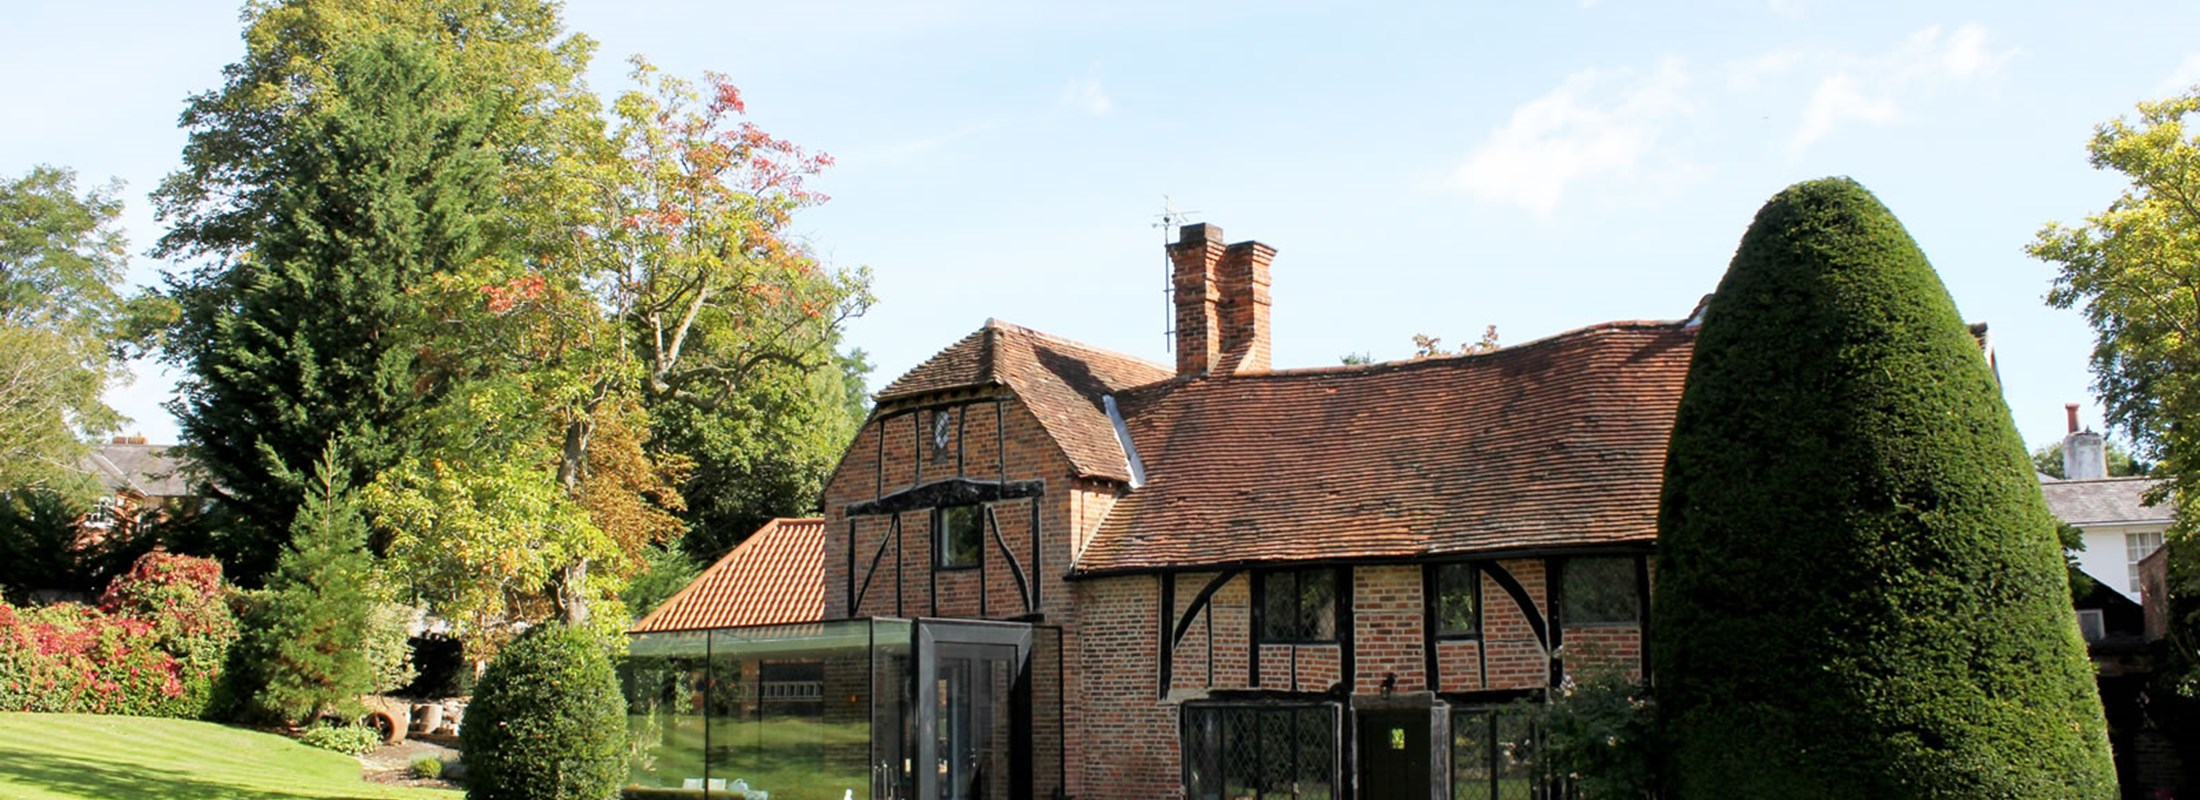 The Brick And Glass House in Cobham, Surrey